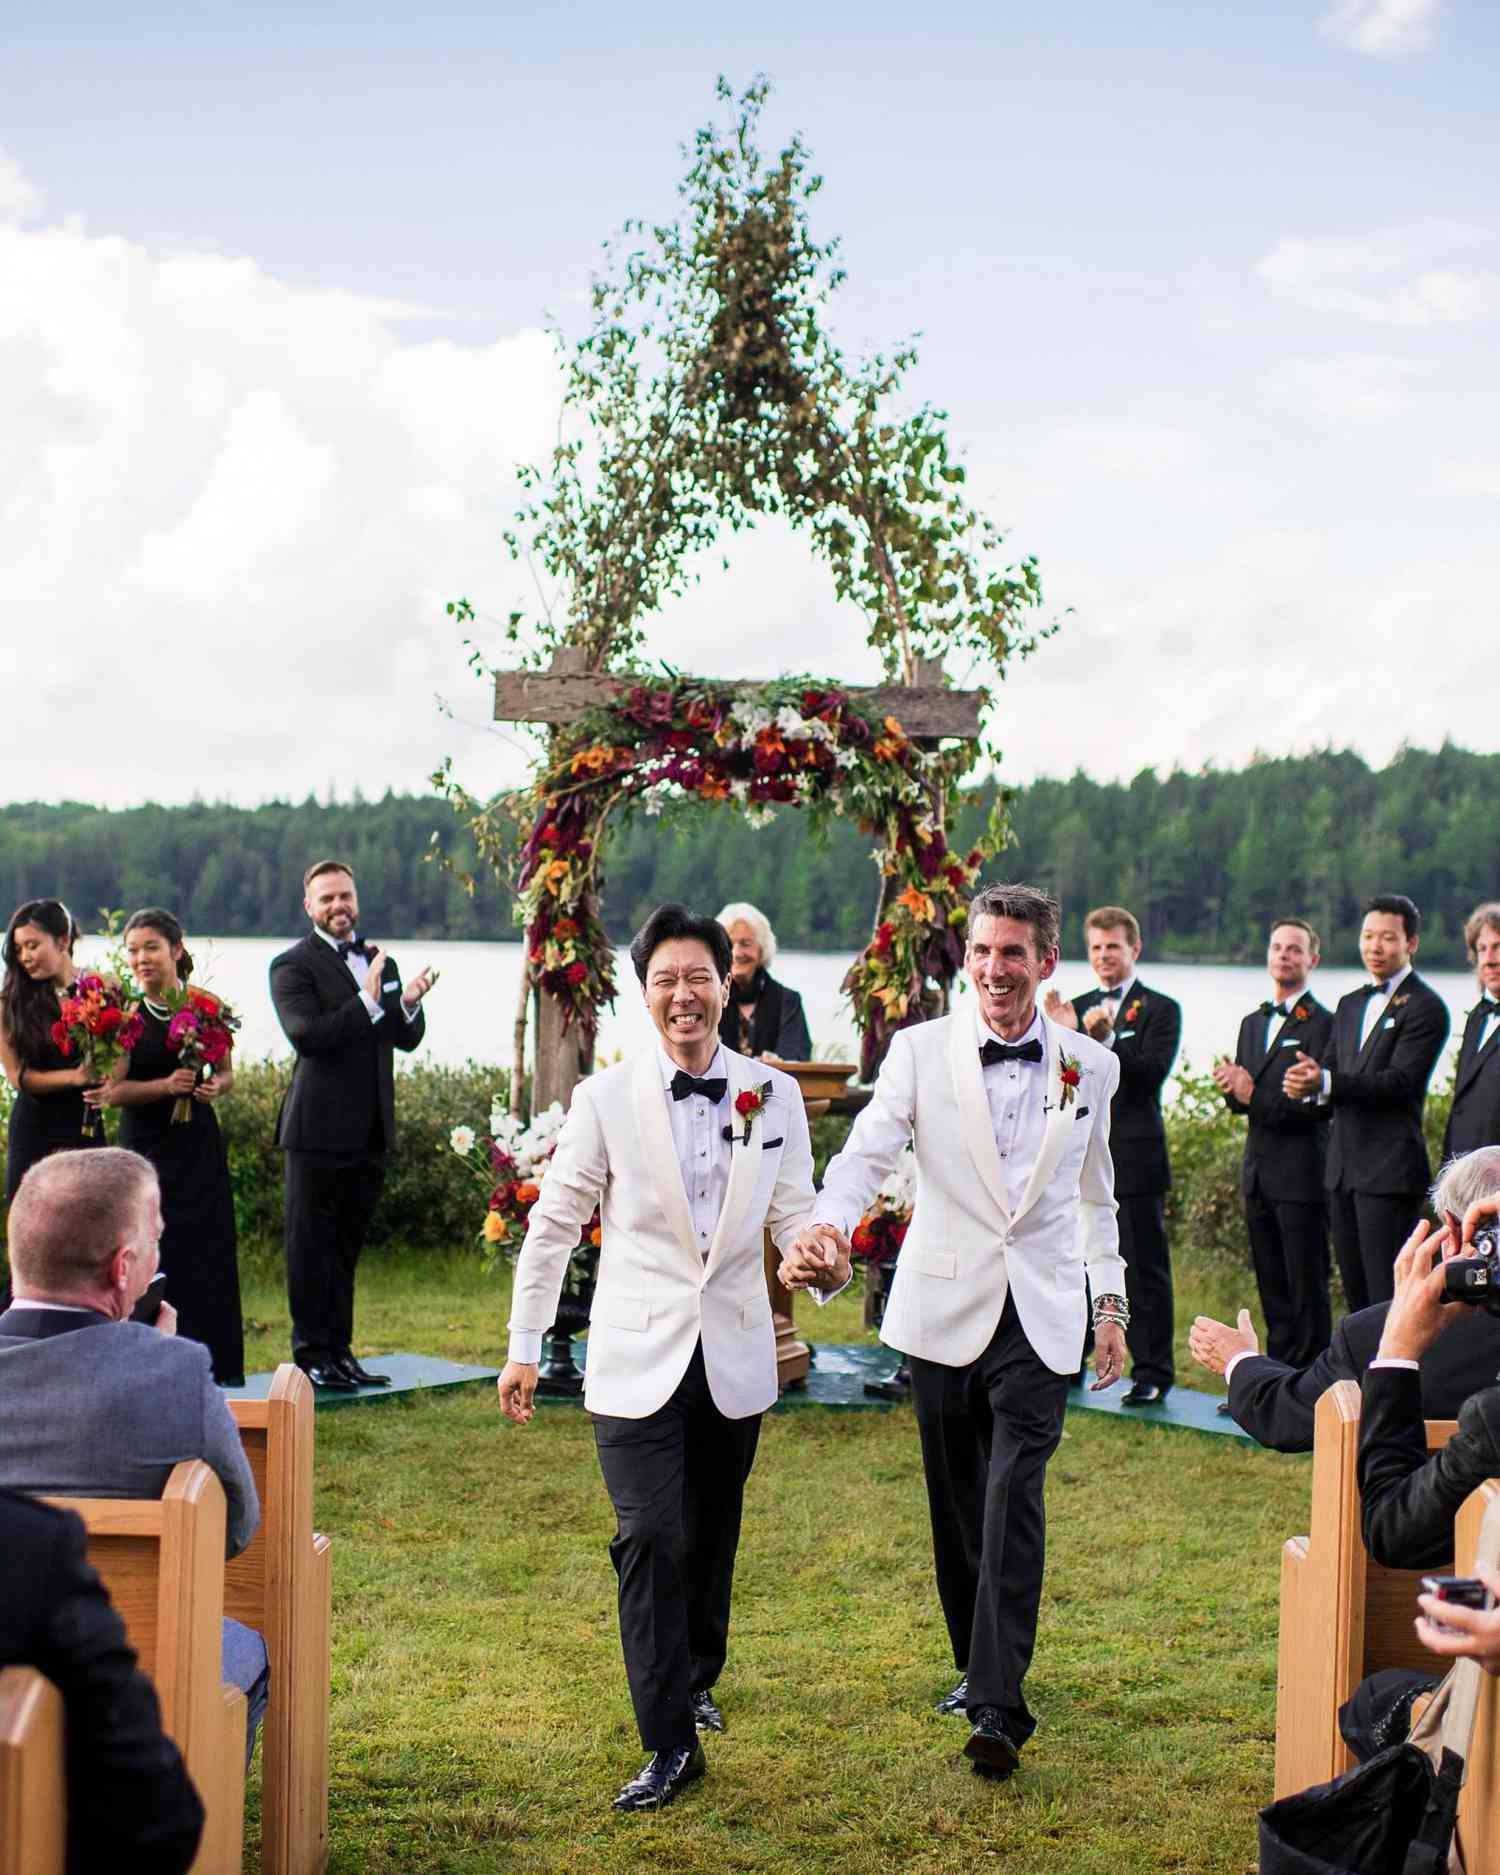 <p>The newlyweds recessed to Mendelssohn's "Wedding March" as an ode to Stephen's time performing as Puck in "A Midsummer Night's Dream."</p>
                            <p>"I looked at my dad and he looked so happy and proud," says Christopher. "I thought, 'How amazing that we live in an era where I could get married to Stephen and he would not only happily accept it, but give his blessing and be there to walk me down the aisle?'"</p>
                            